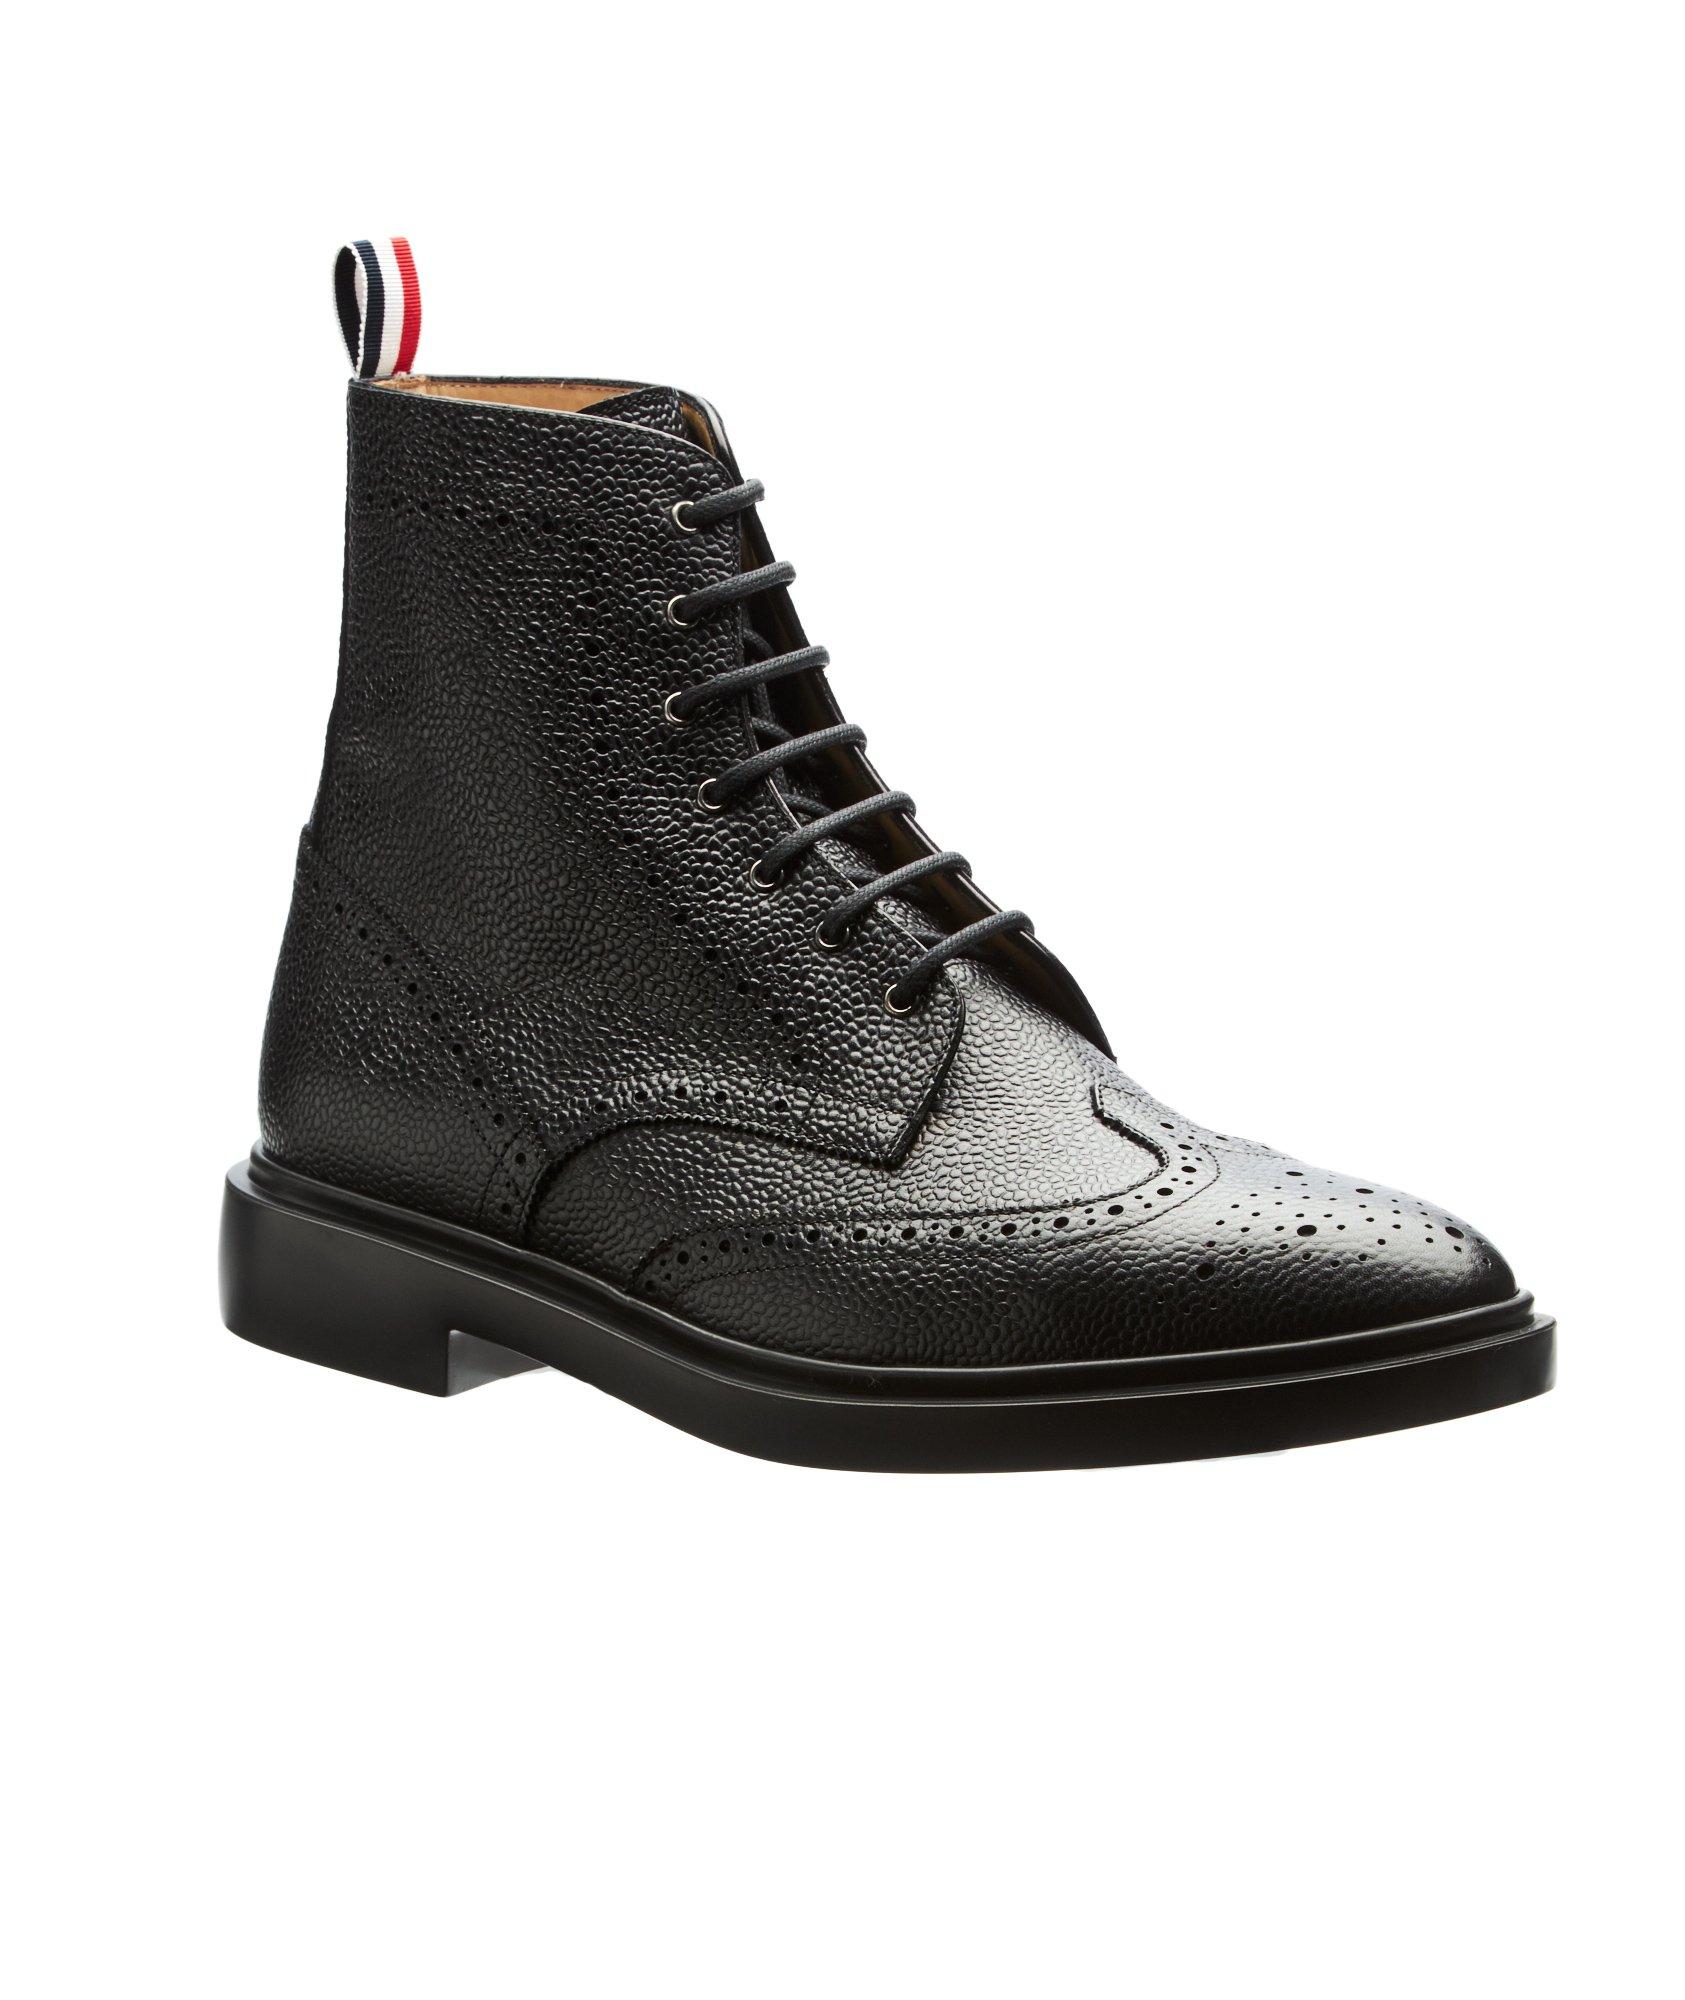 Wingtip Pebbled Leather Boots image 0